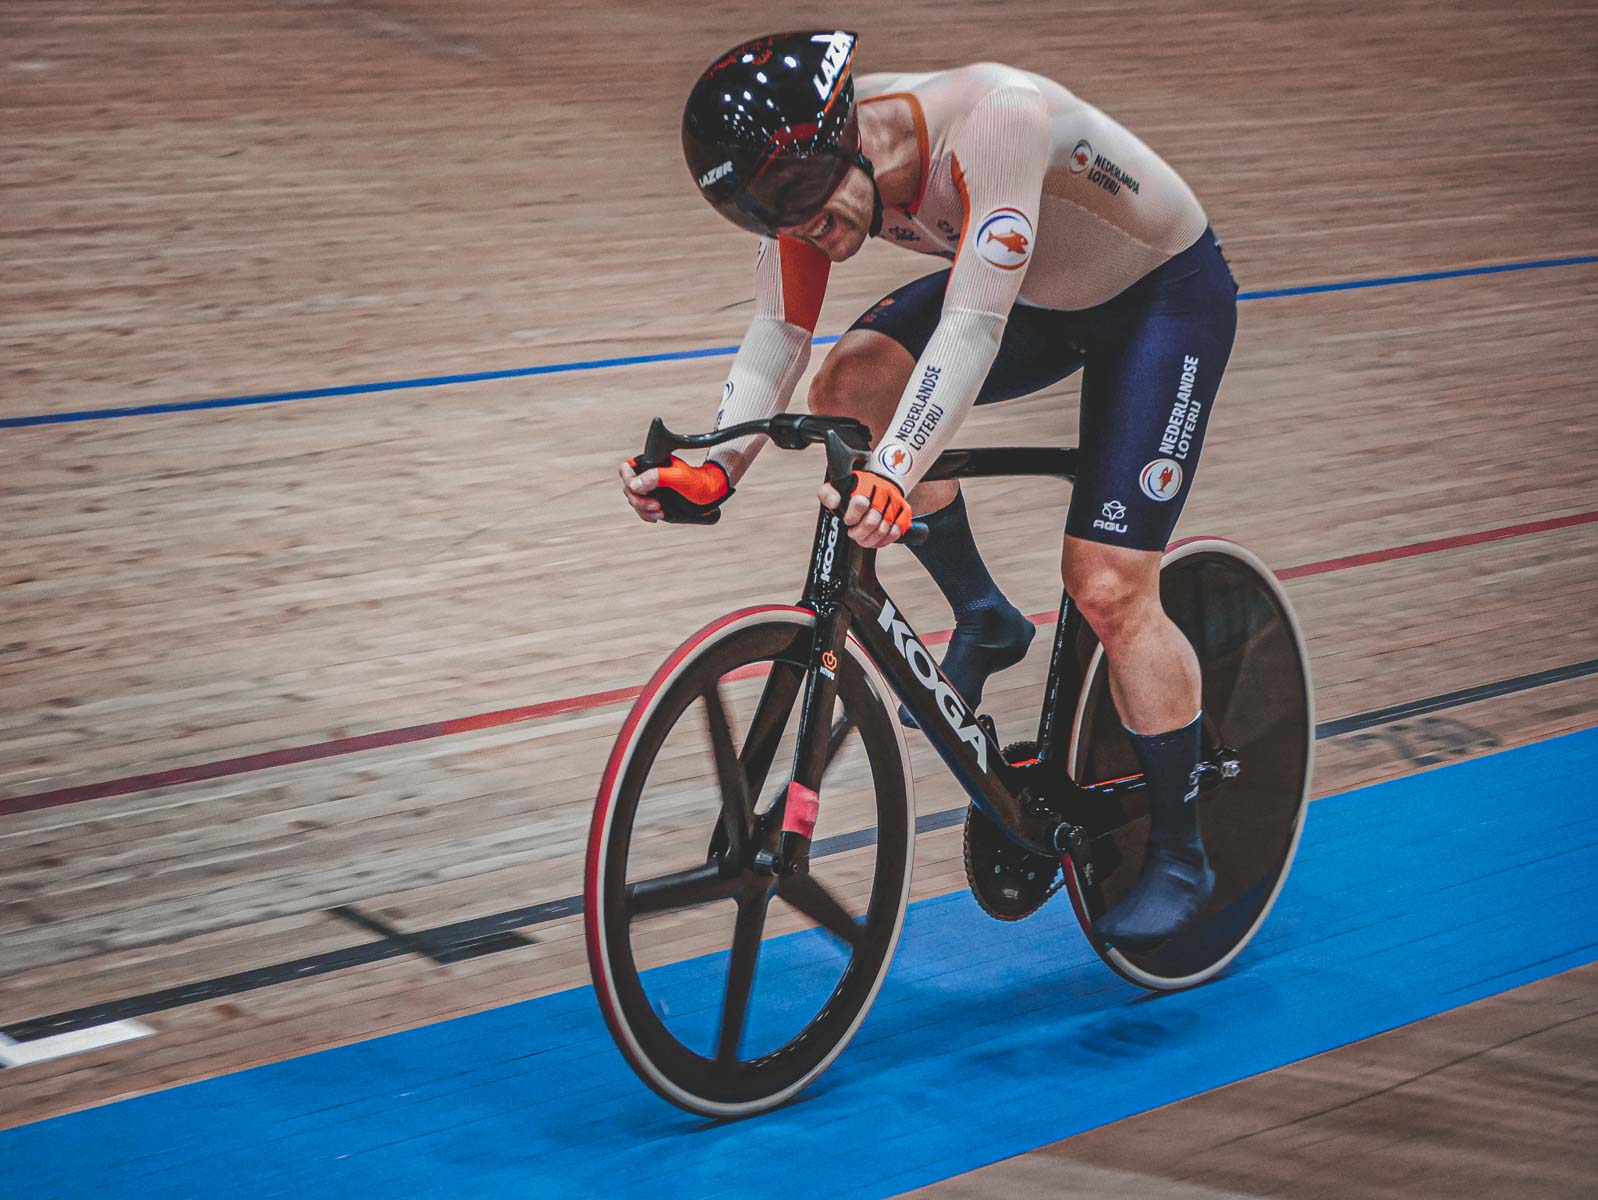 Big fight at the European Track Championship